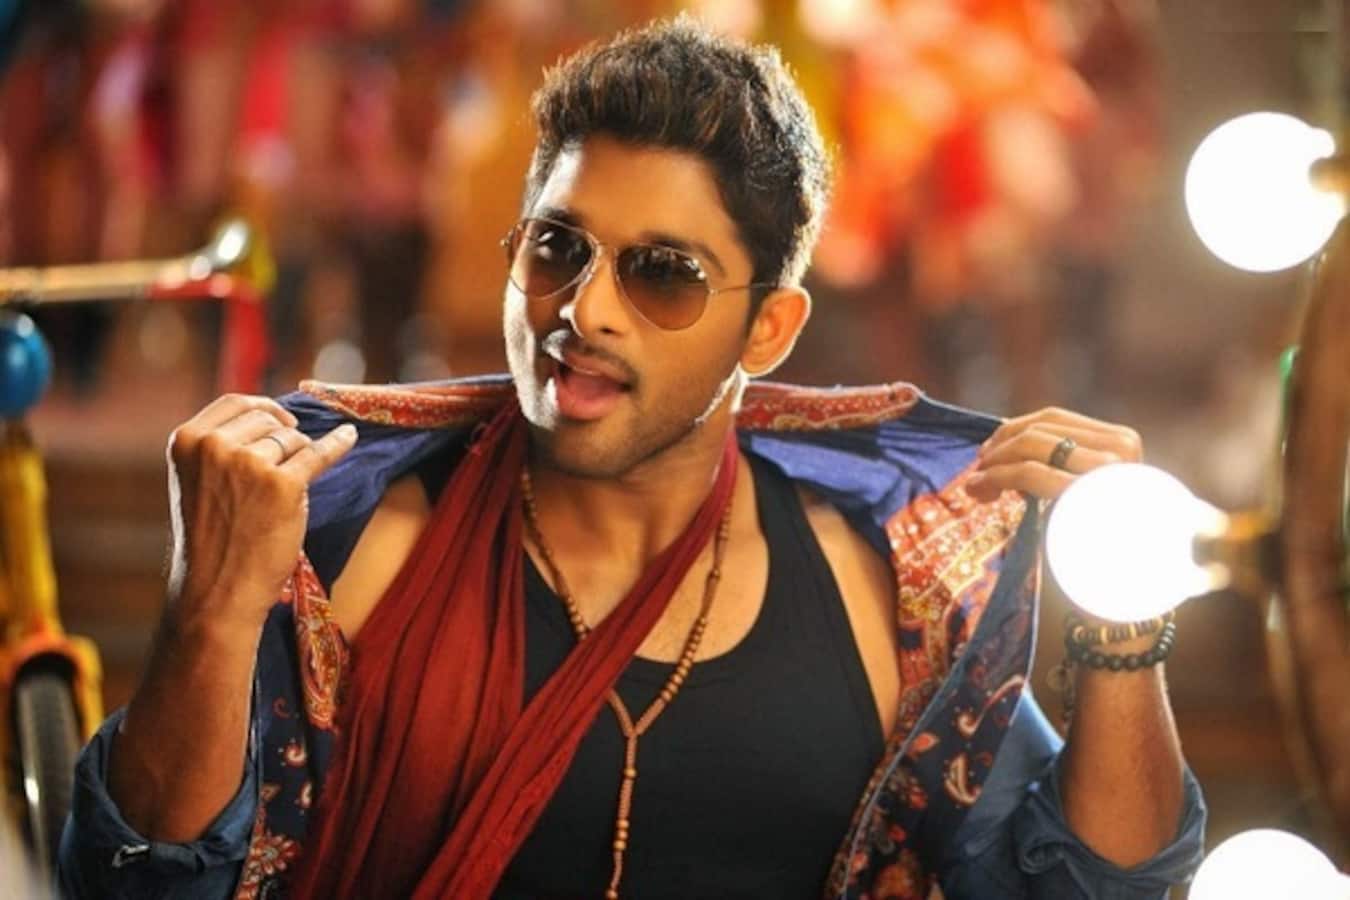 DJ star Allu Arjun to announce his next film's title on June 14 - Bollywood  News & Gossip, Movie Reviews, Trailers & Videos at 